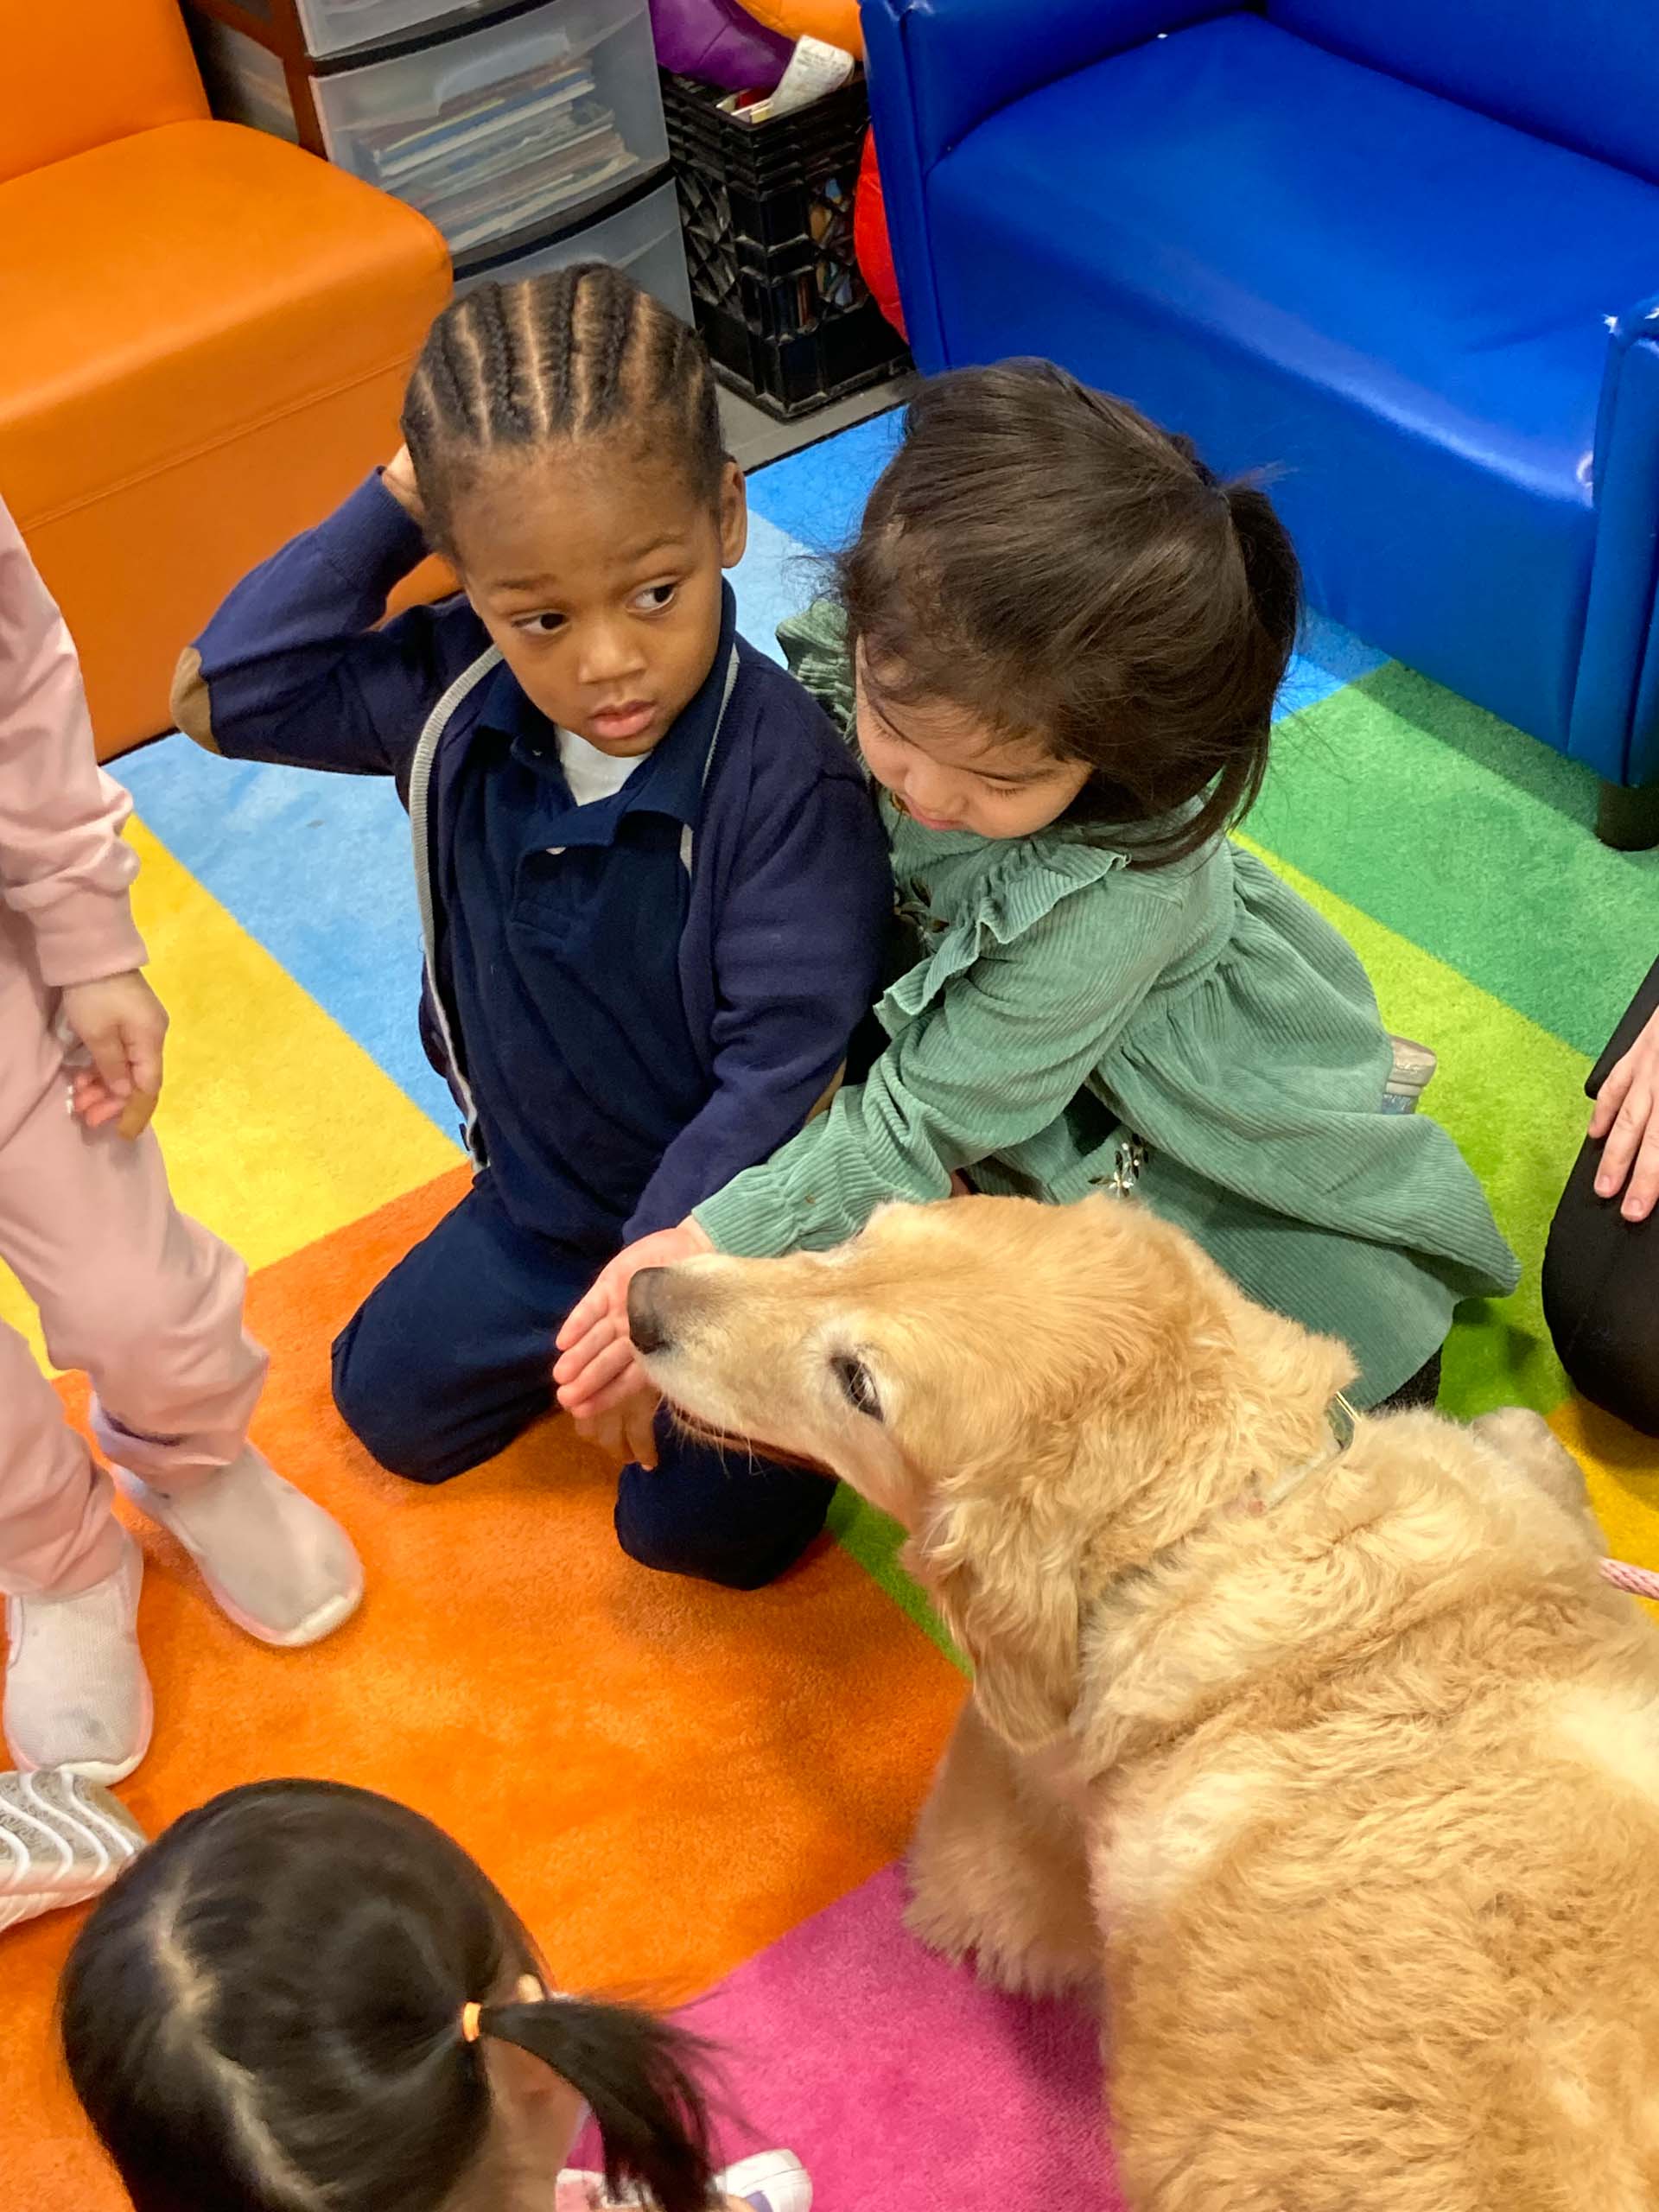 A group of children petting a dog at a camp.